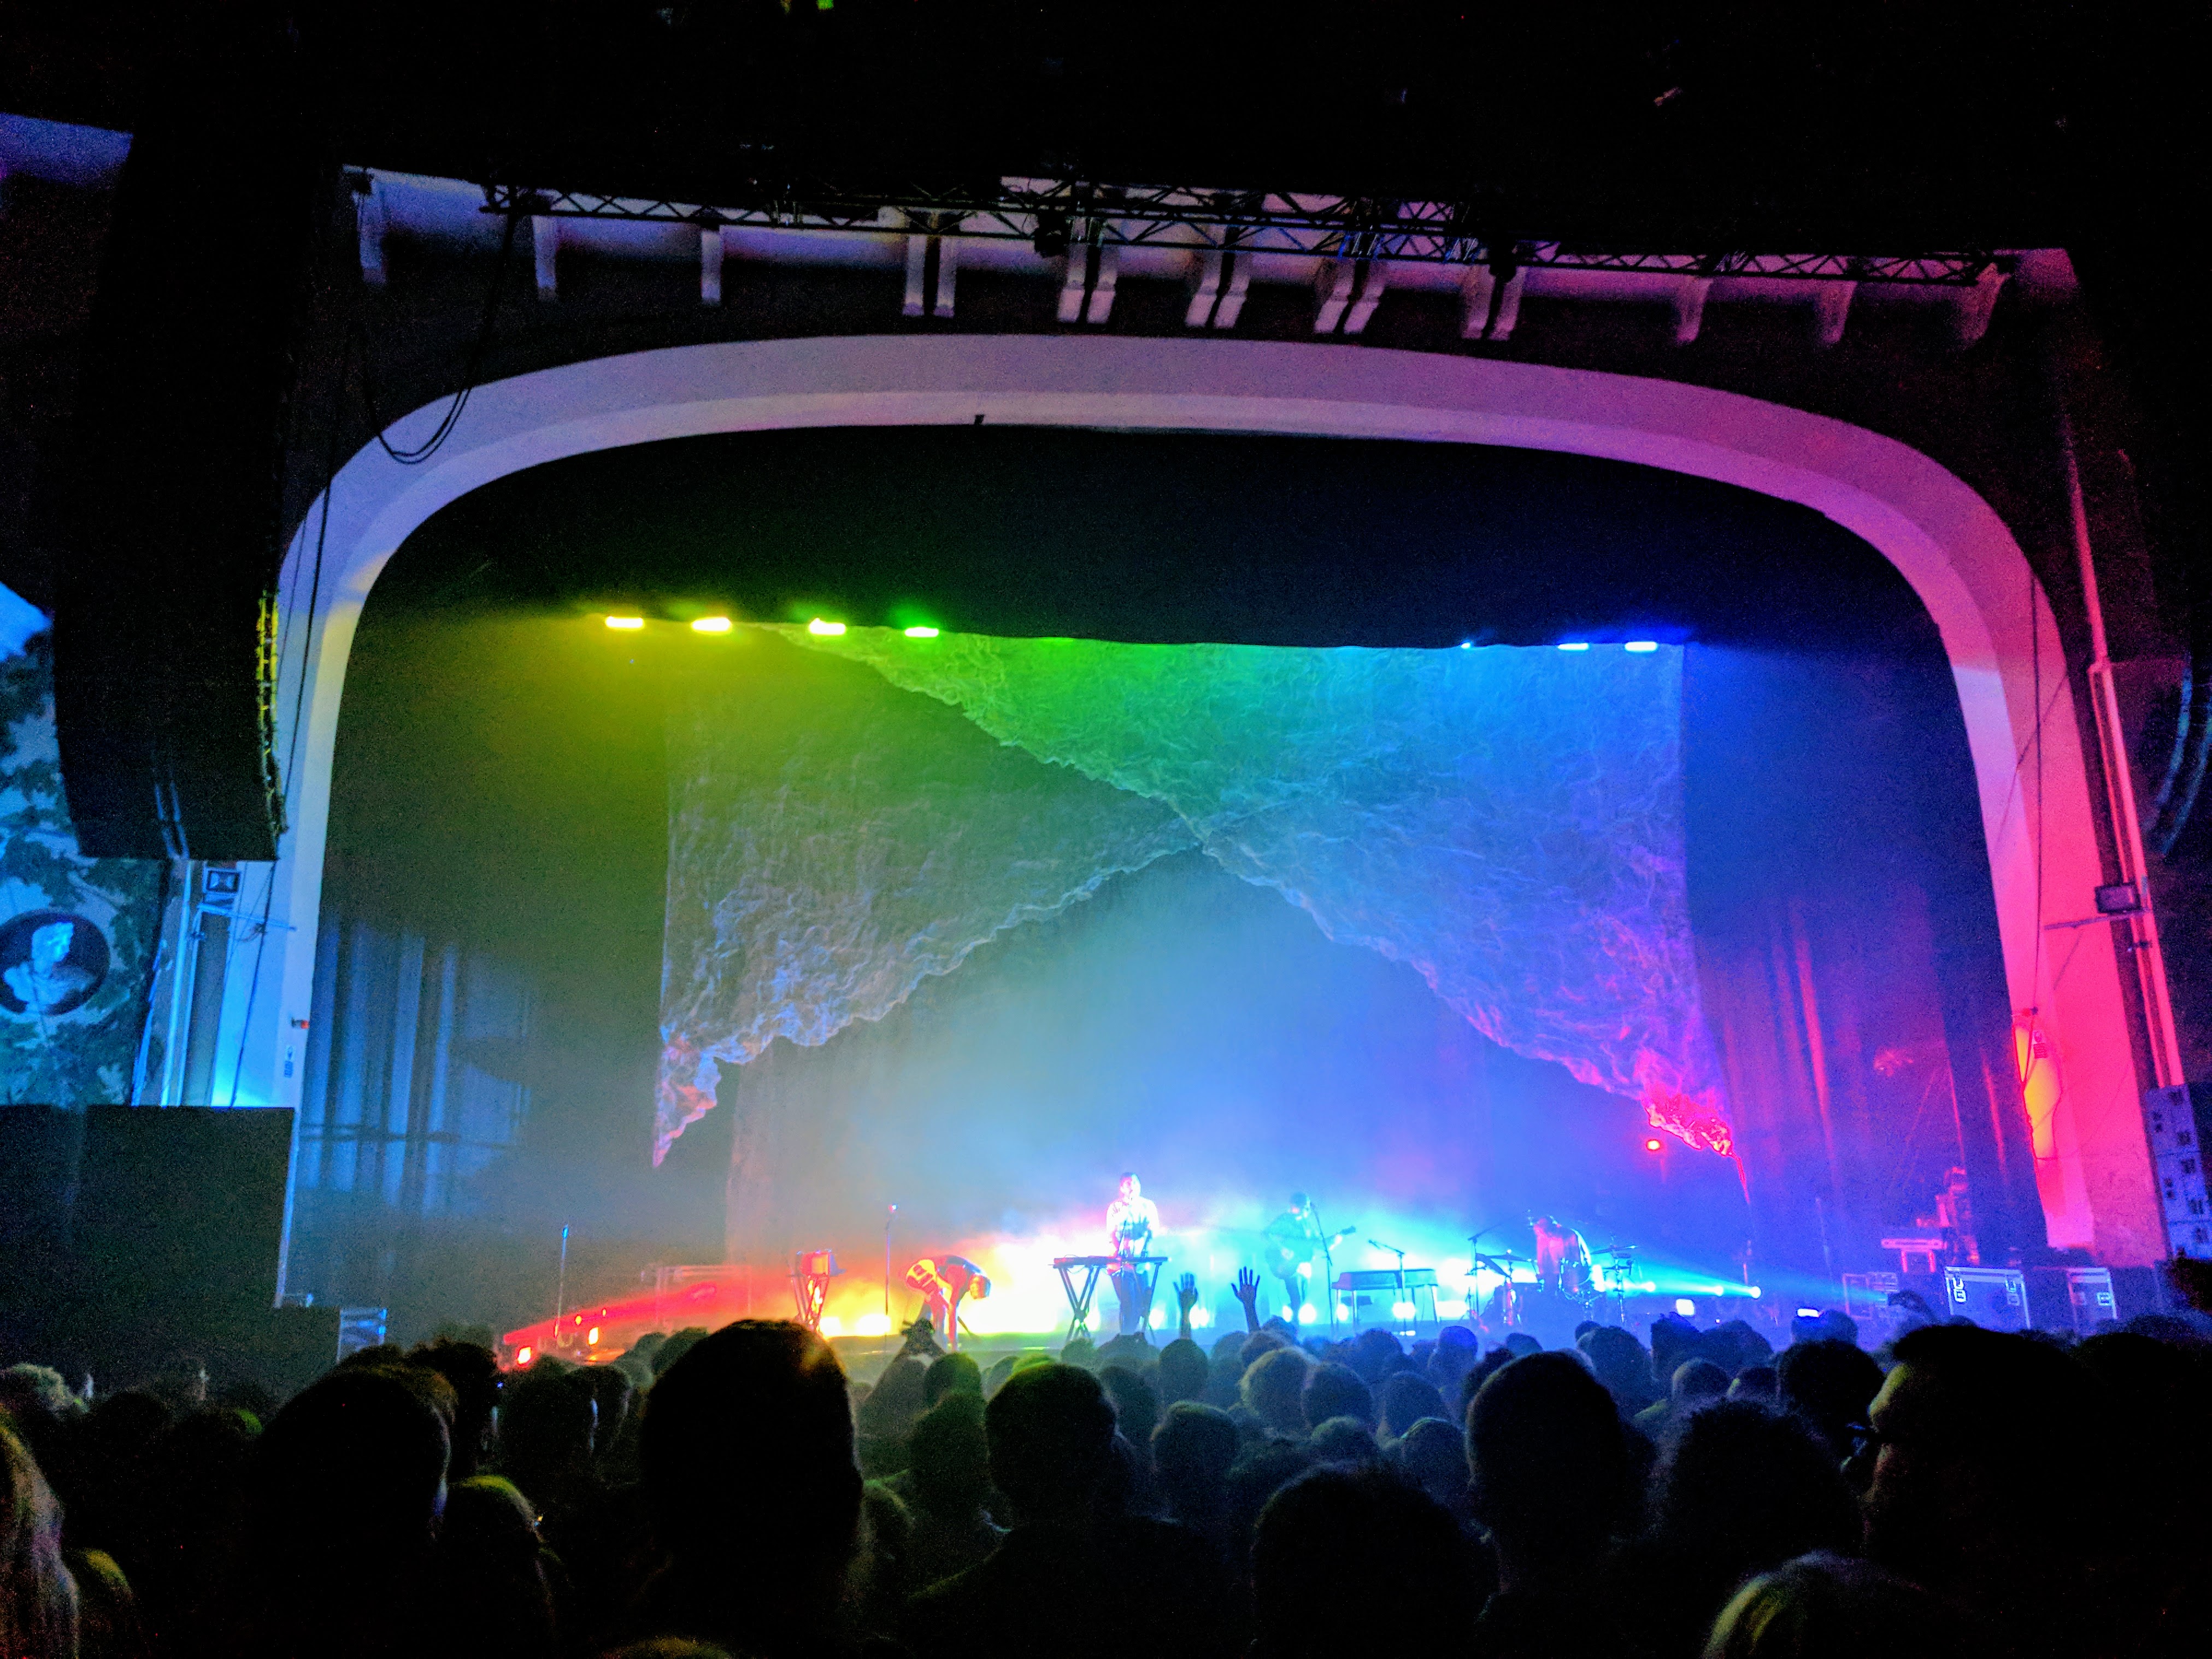 The stage at Brixton Academy lit up in rainbow. I don't remember who's playing at this point, it's difficult to make out.